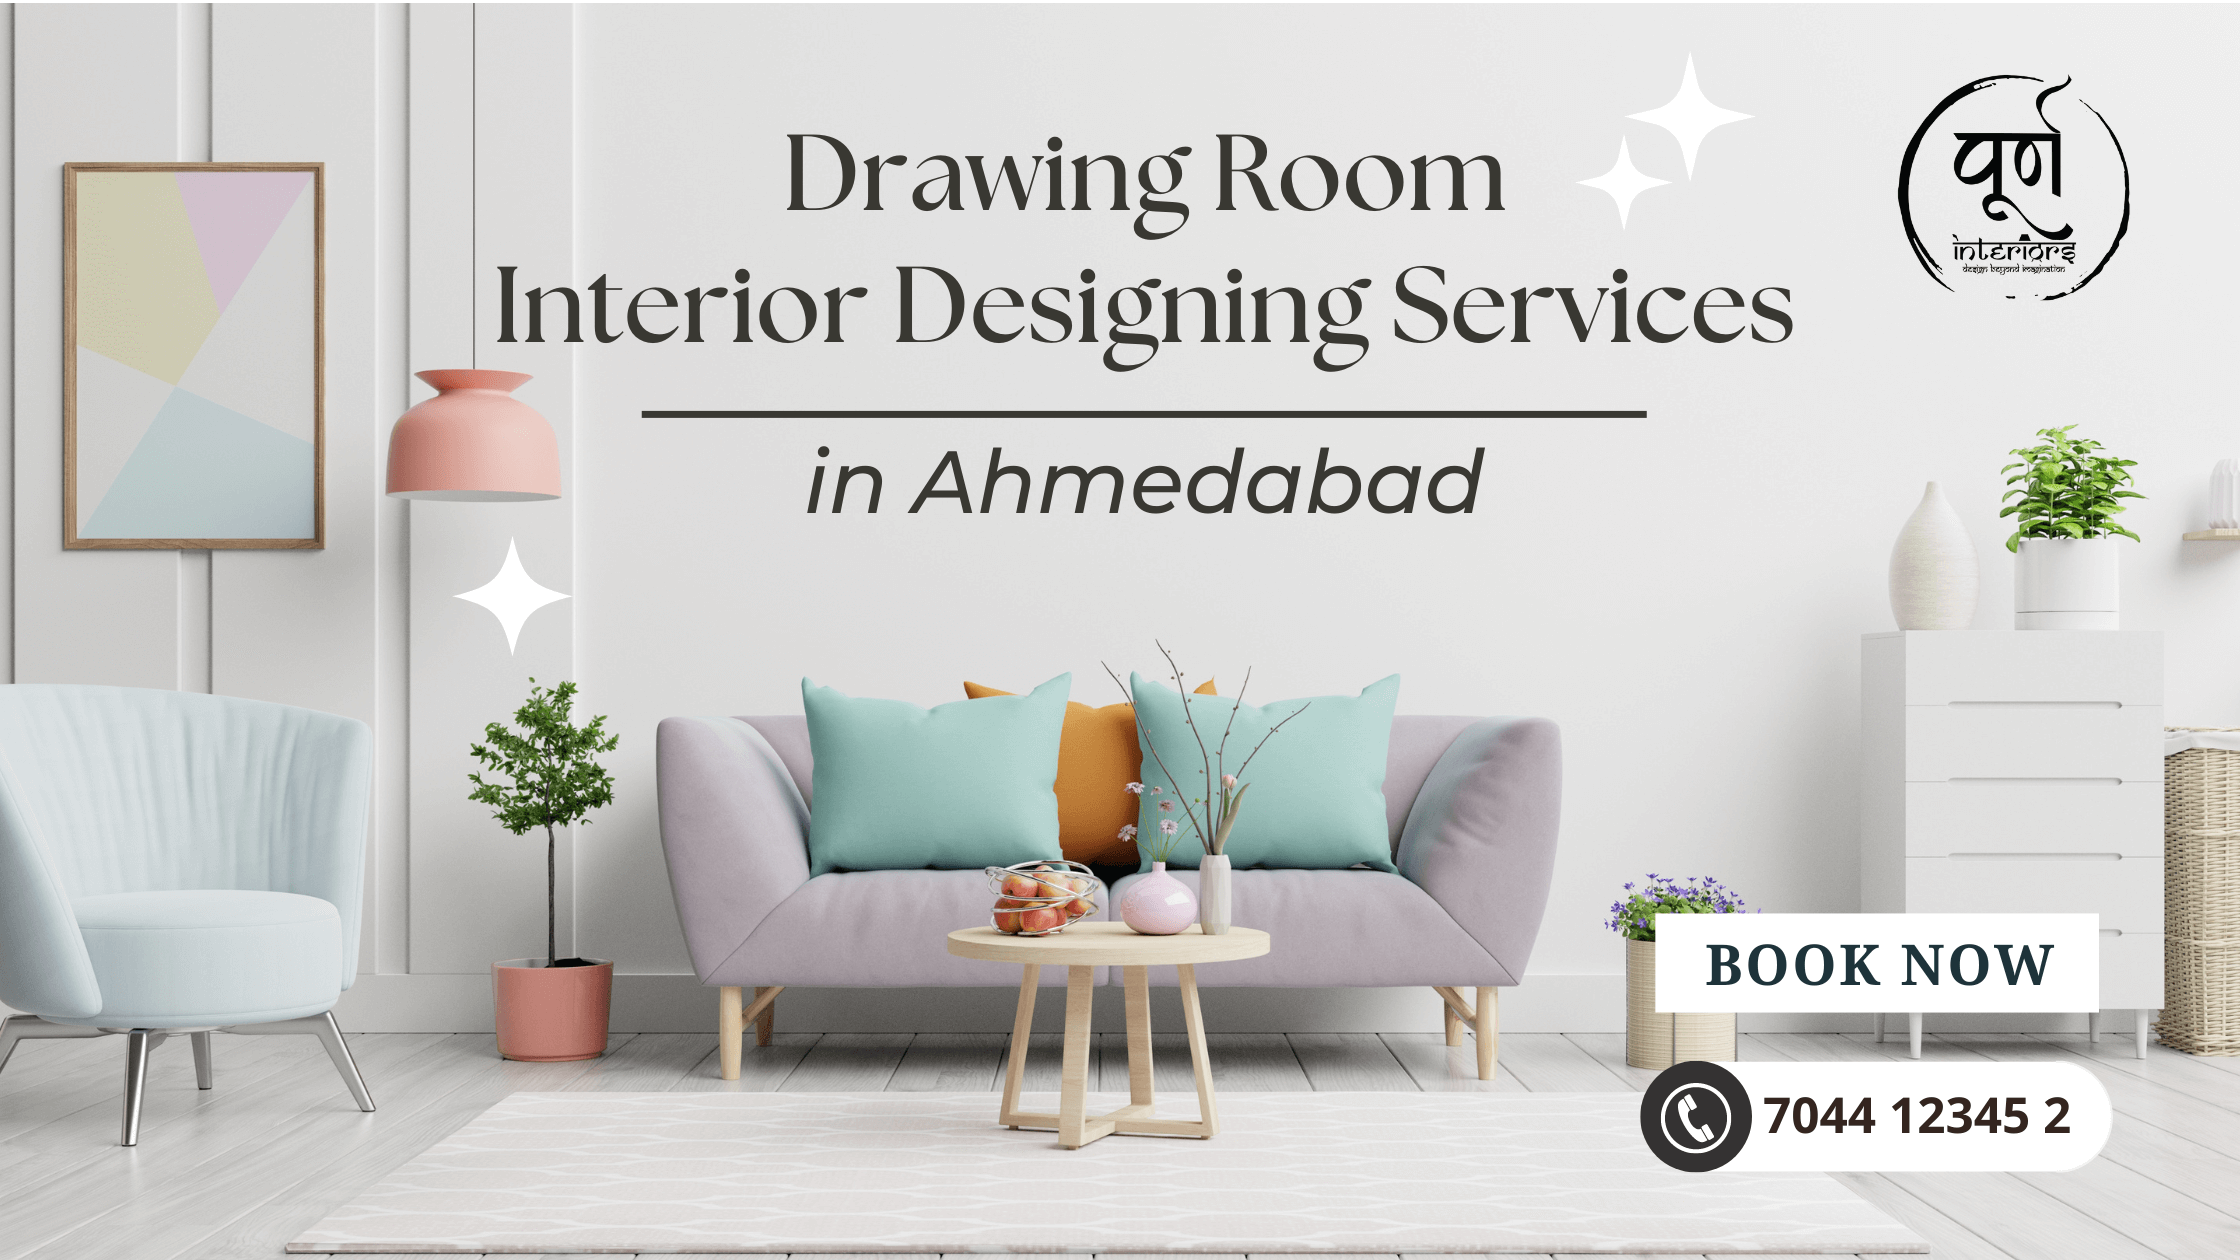 Drawing Room Interior Designing Services in Ahmedabad